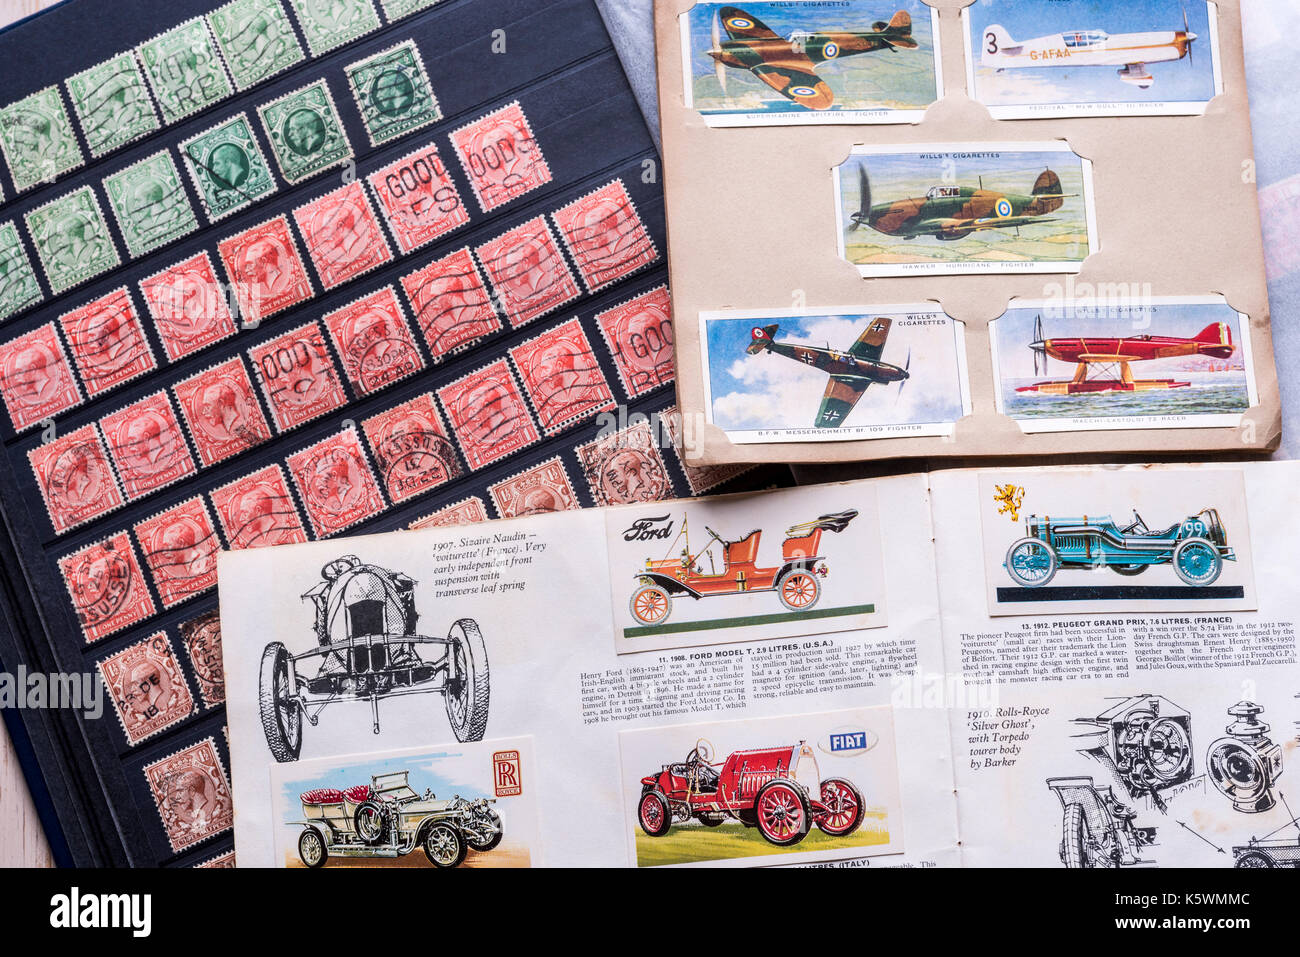 Postage stamps and cigarette cards, collecting. Memories nostalgia. Stock Photo